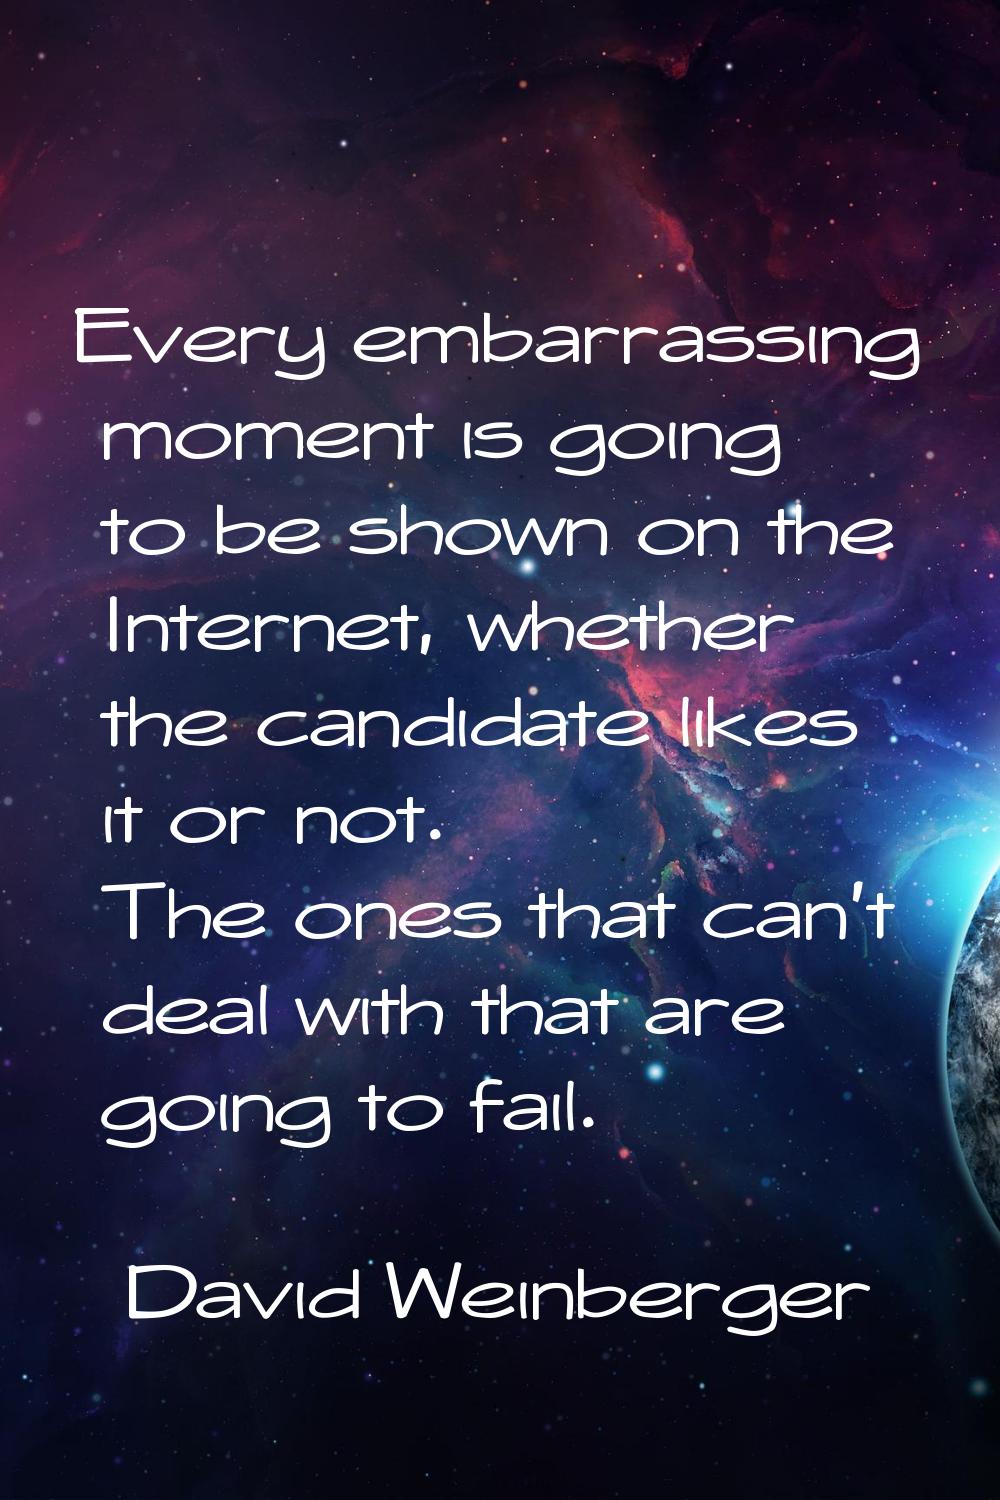 Every embarrassing moment is going to be shown on the Internet, whether the candidate likes it or n